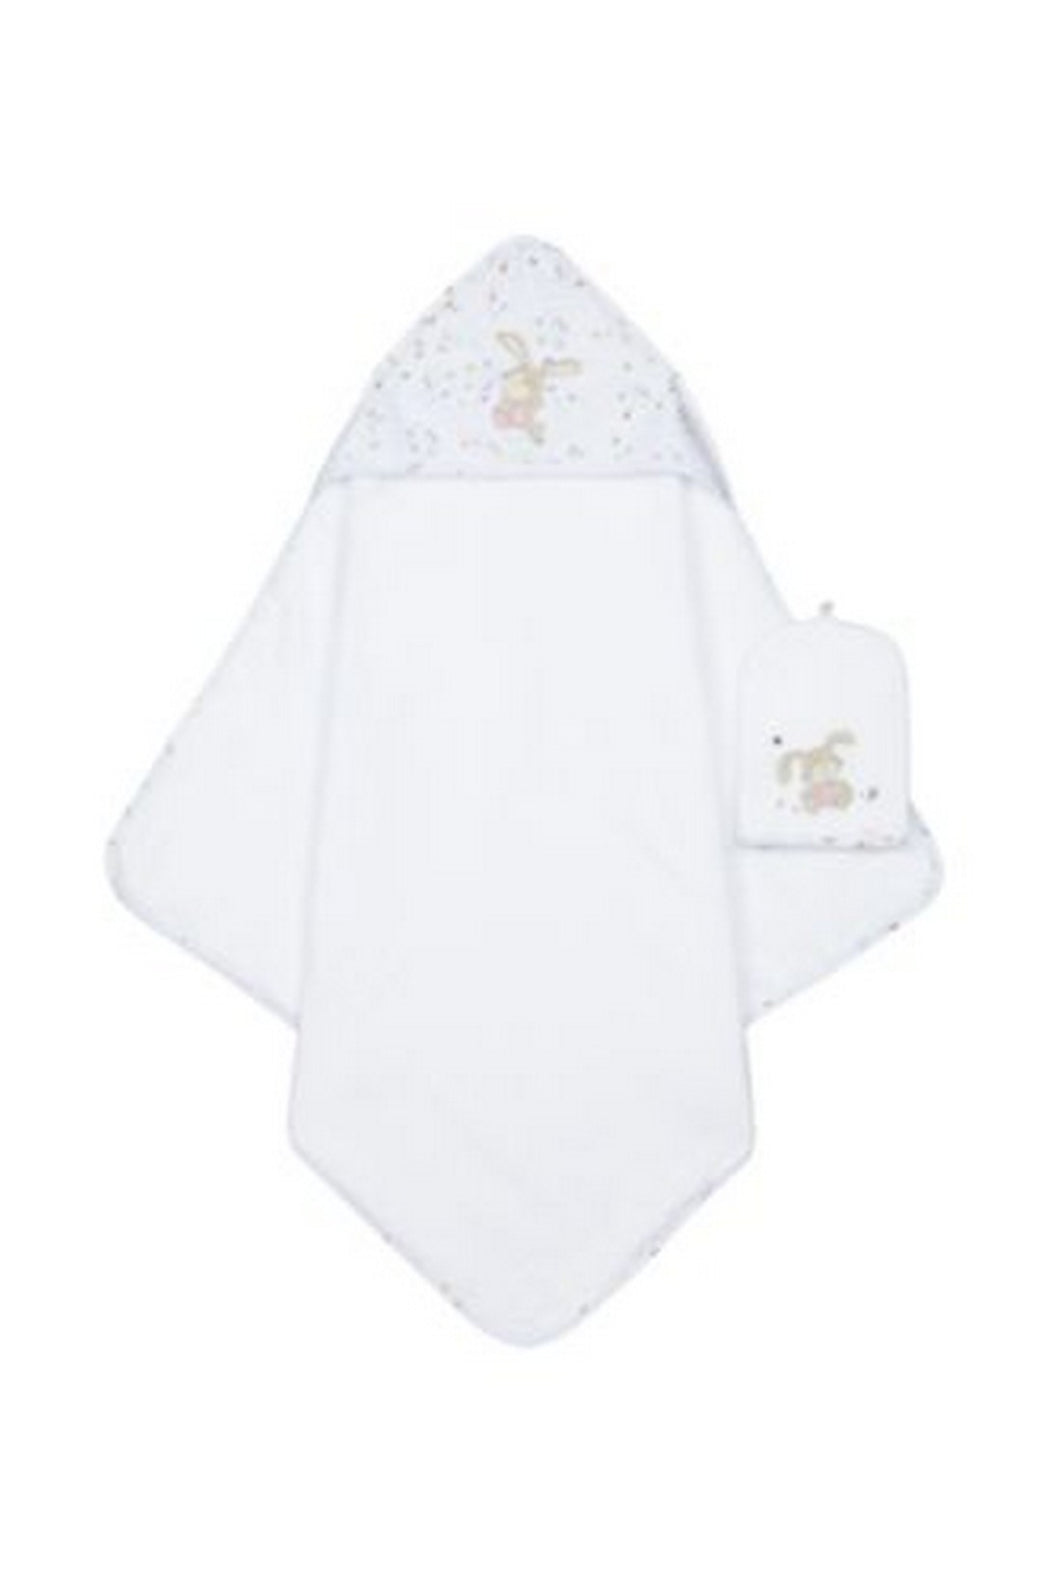 Mothercare Spring Flower Cuddle N Dry And Mitt Set 1